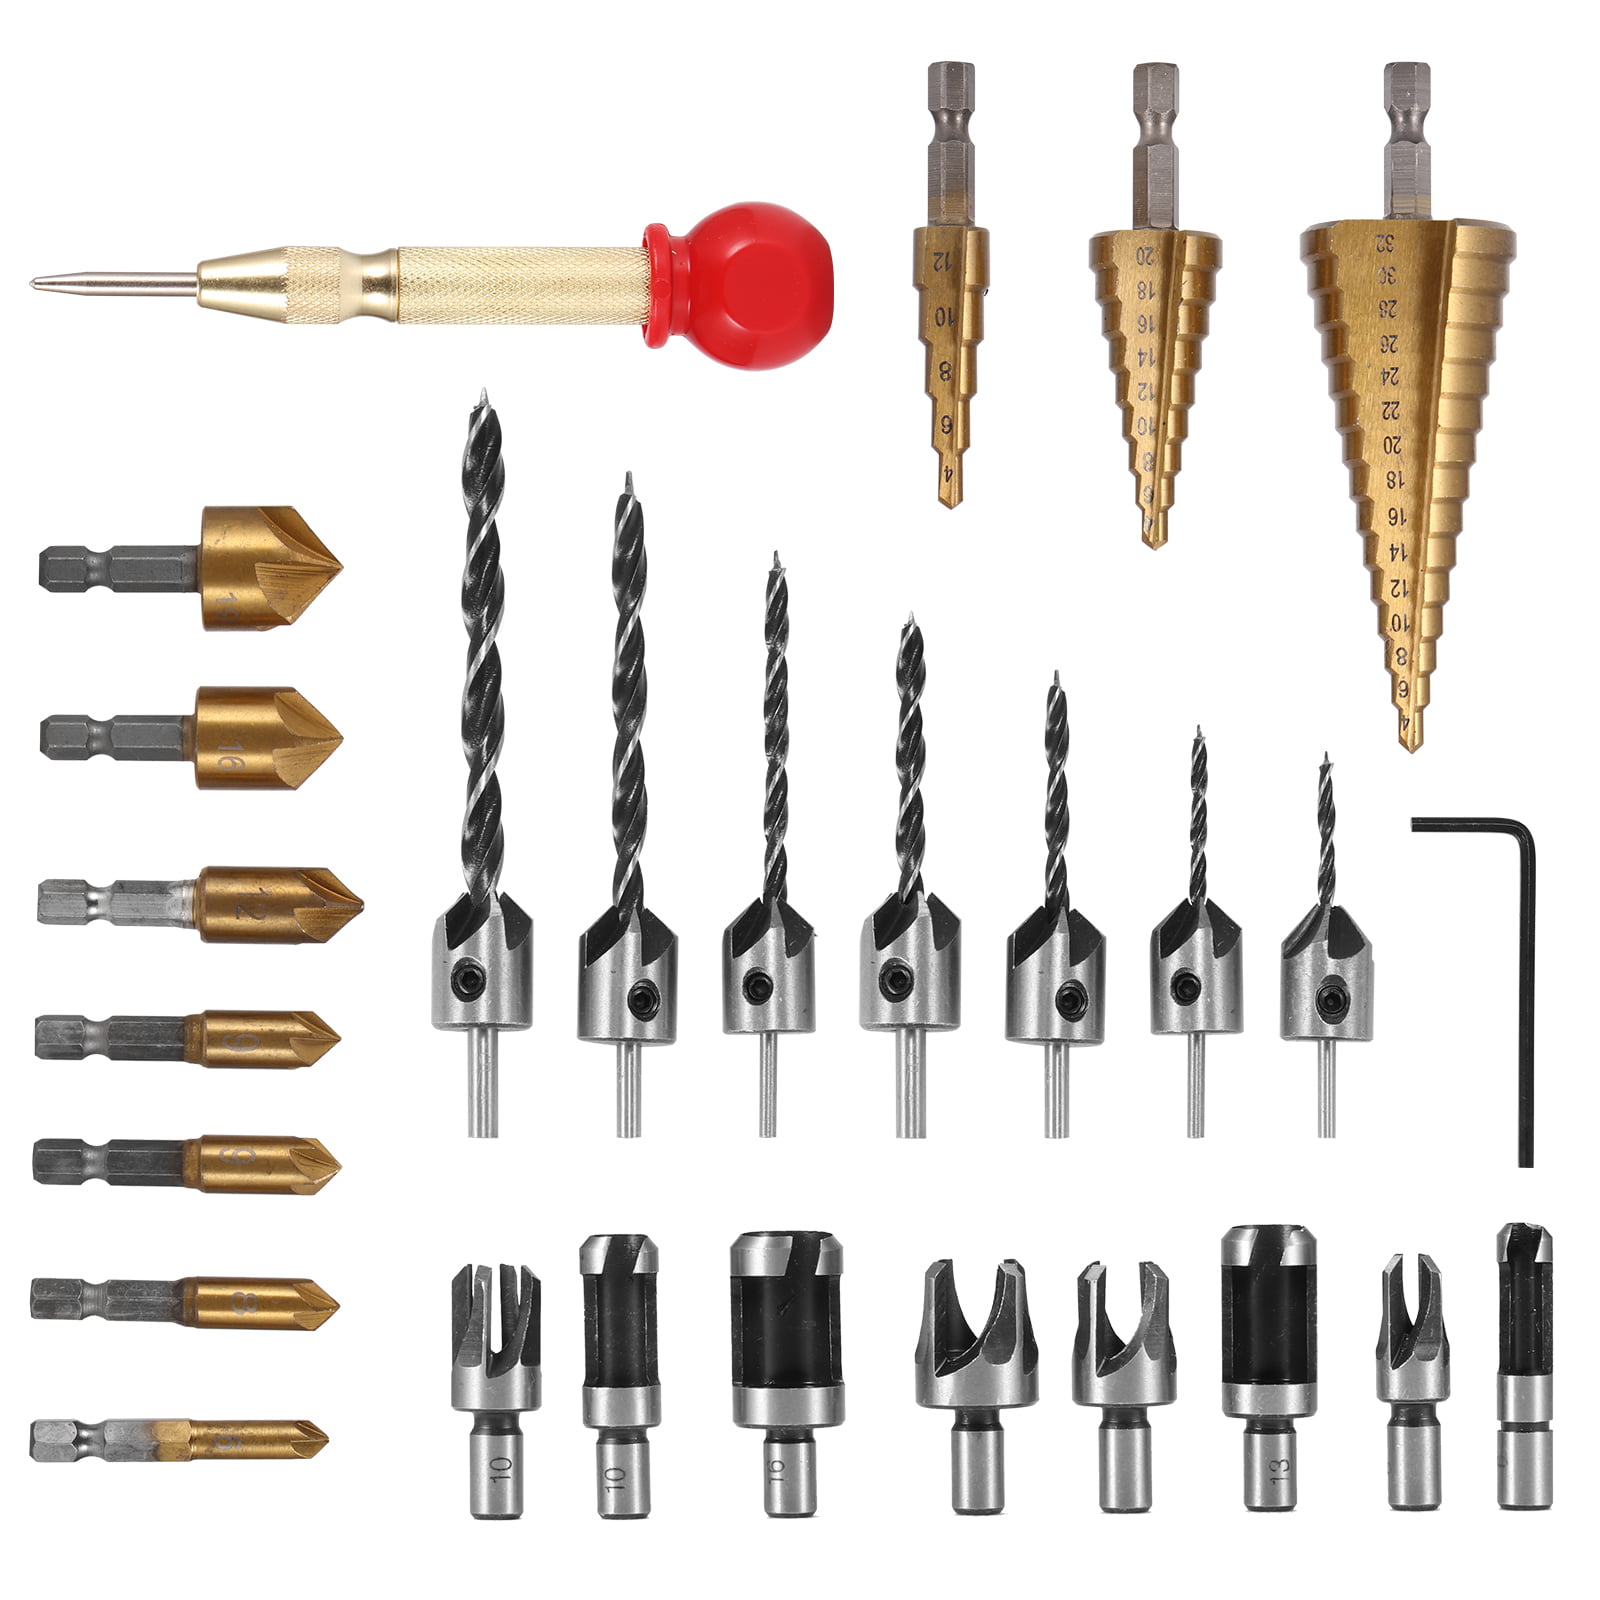 80mm DIY Tool Professional Drill Bit Guide Template Adjustable Sizes 4mm 